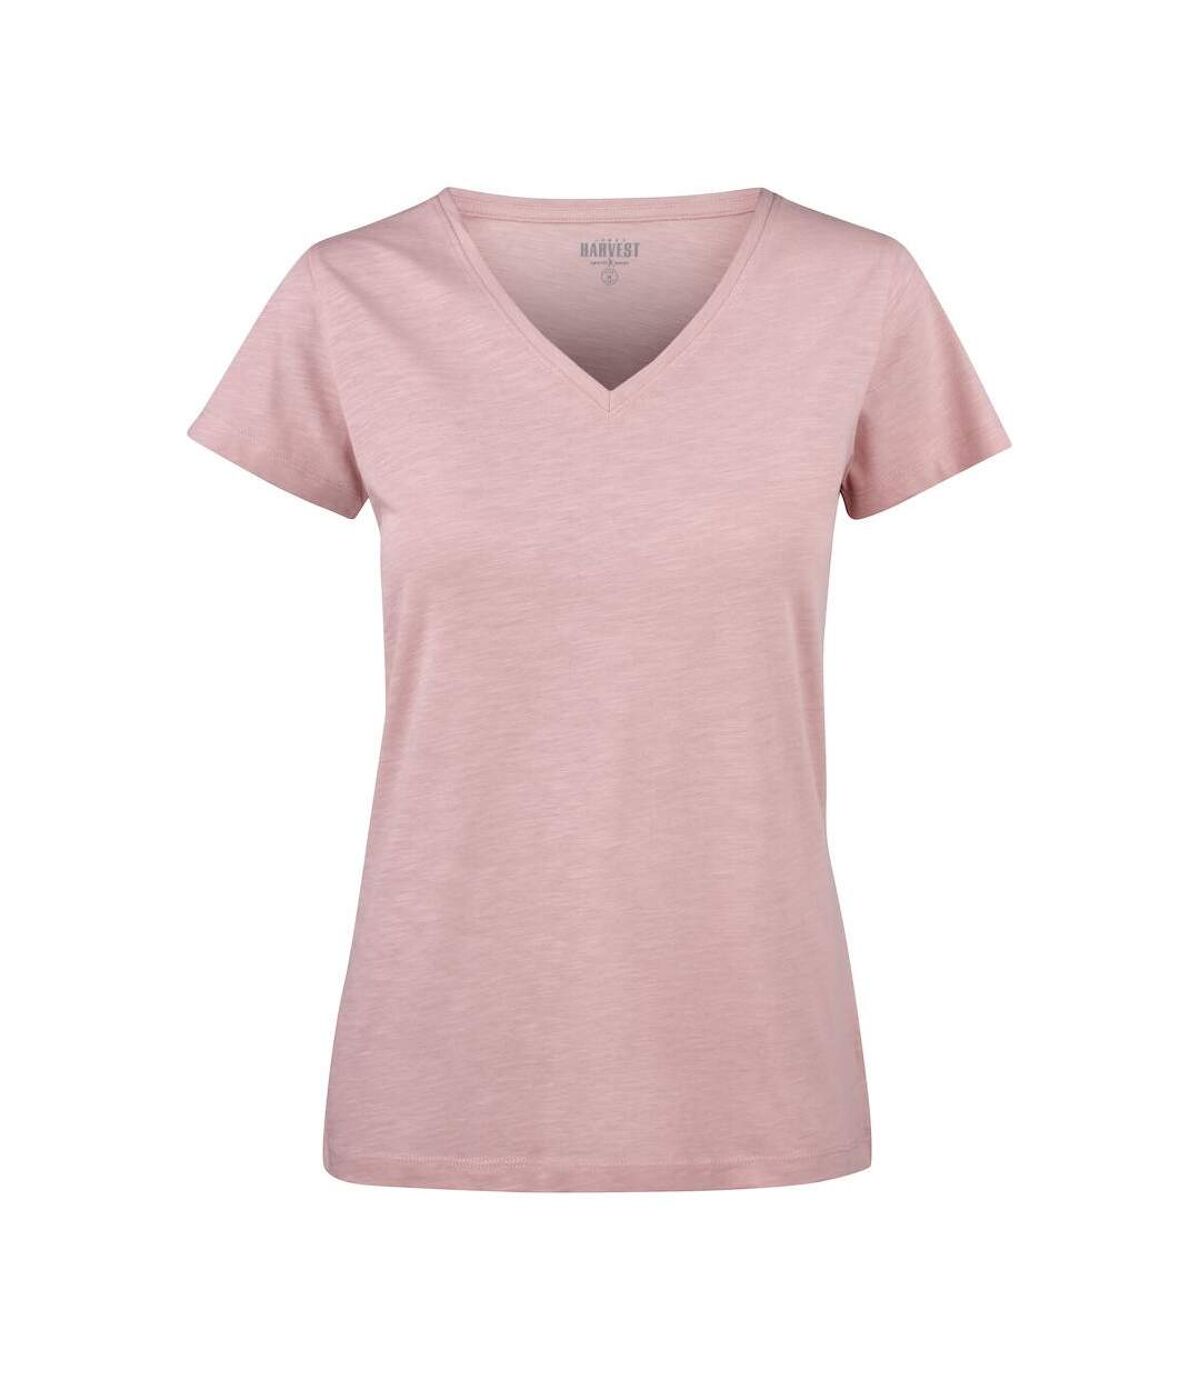 James Harvest Womens/Ladies Whailford V Neck T-Shirt (Dusty Pink)